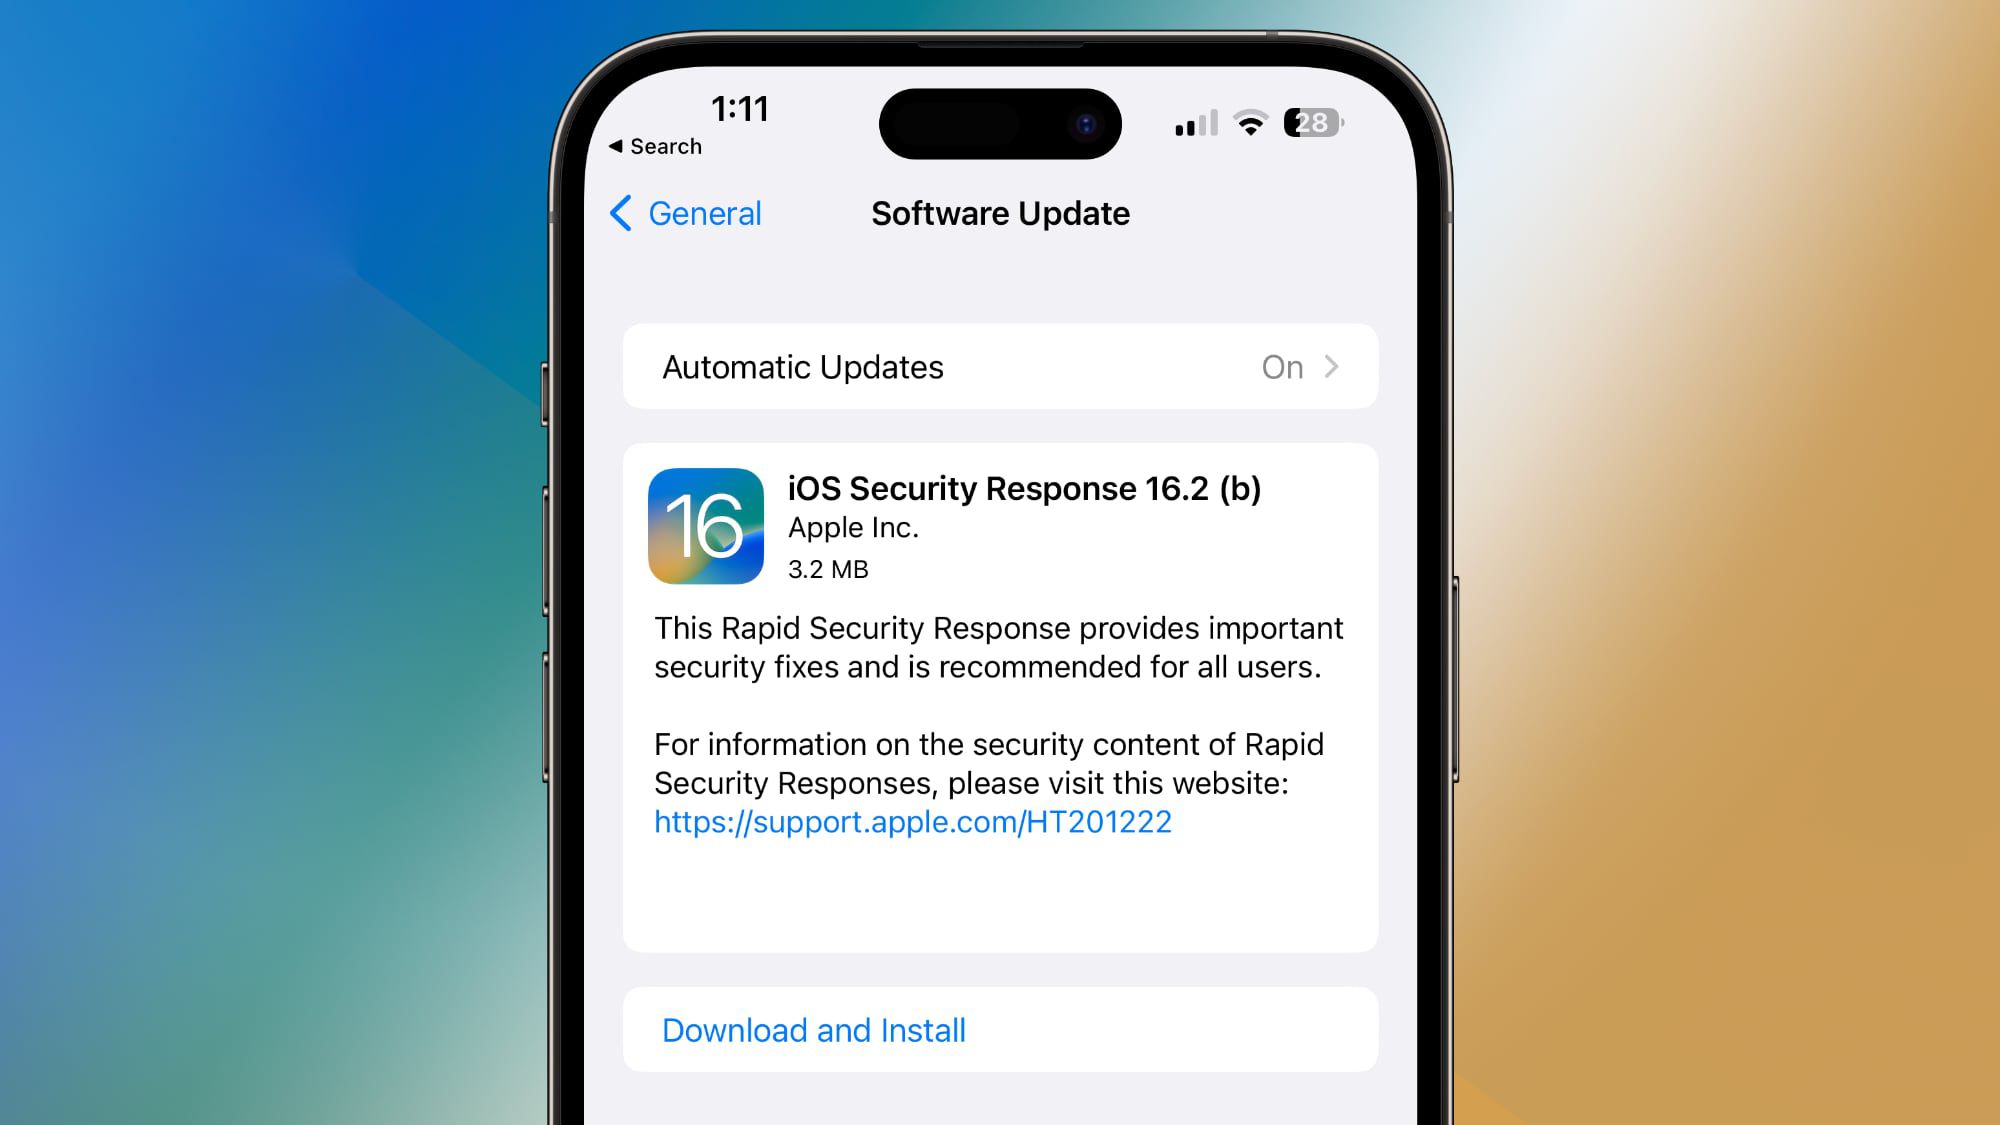 Apple Releases Another Rapid Security Response Update for iOS 16.2 Beta Users - macrumors.com